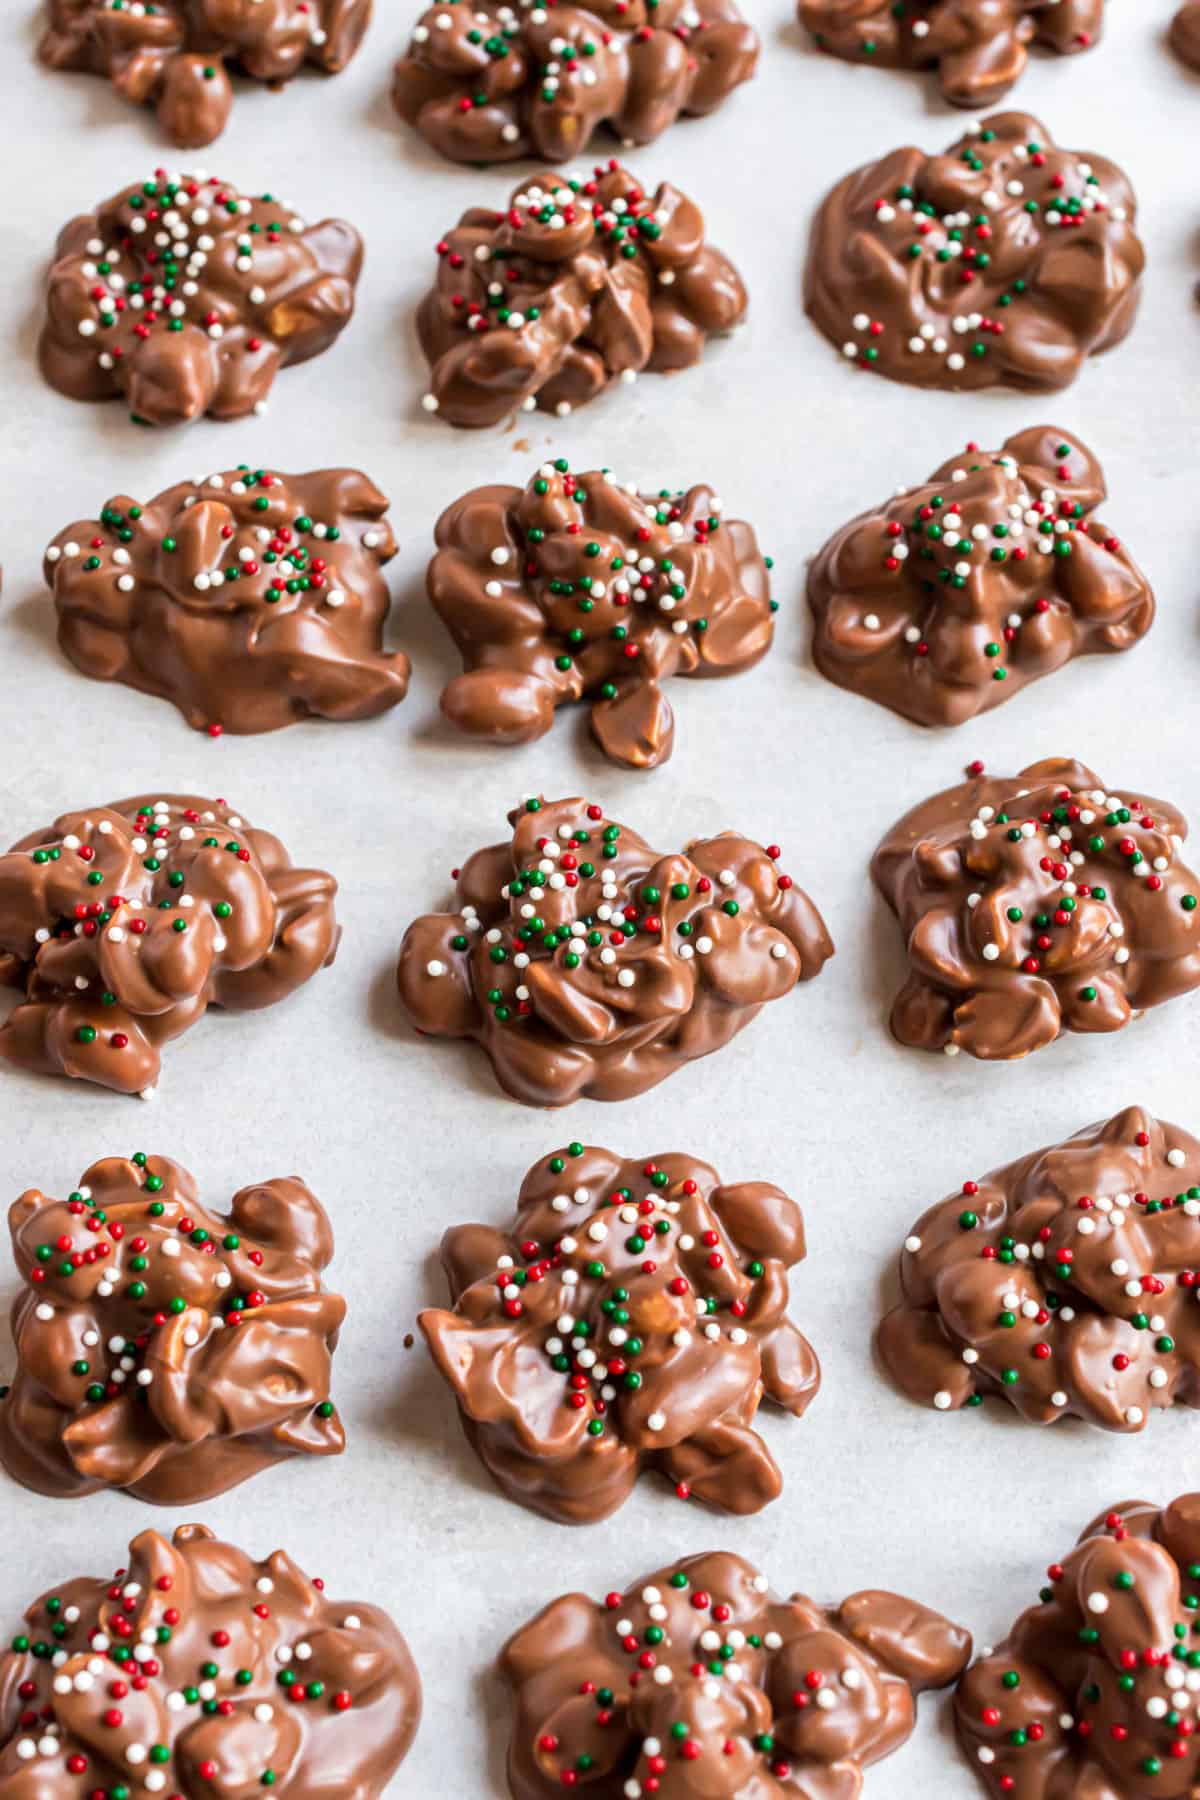 Pieces of chocolate christmas candy on parchment paper.